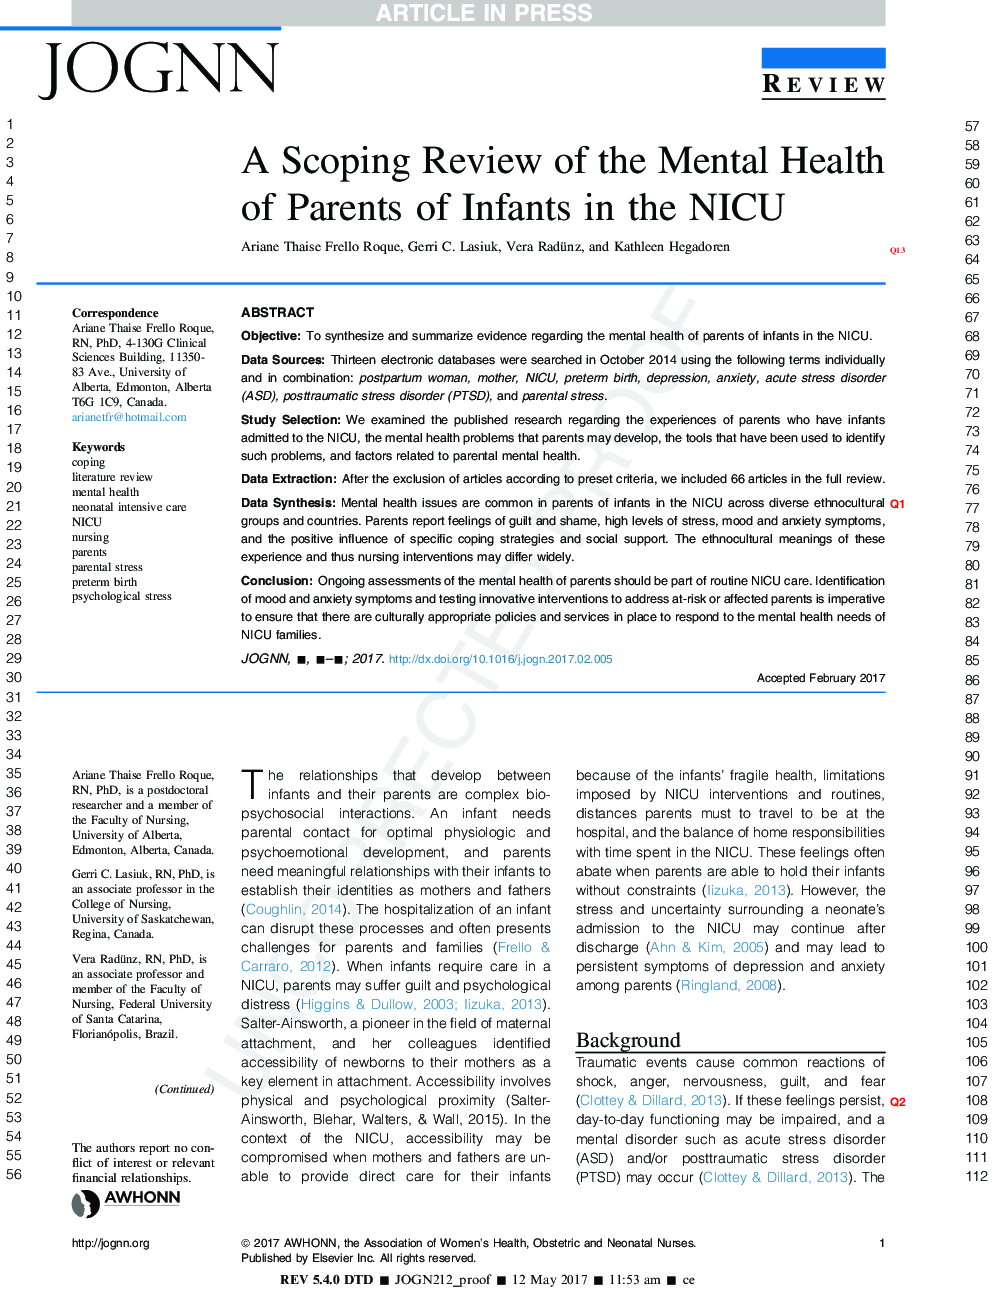 Scoping Review of the Mental Health of Parents of Infants in the NICU